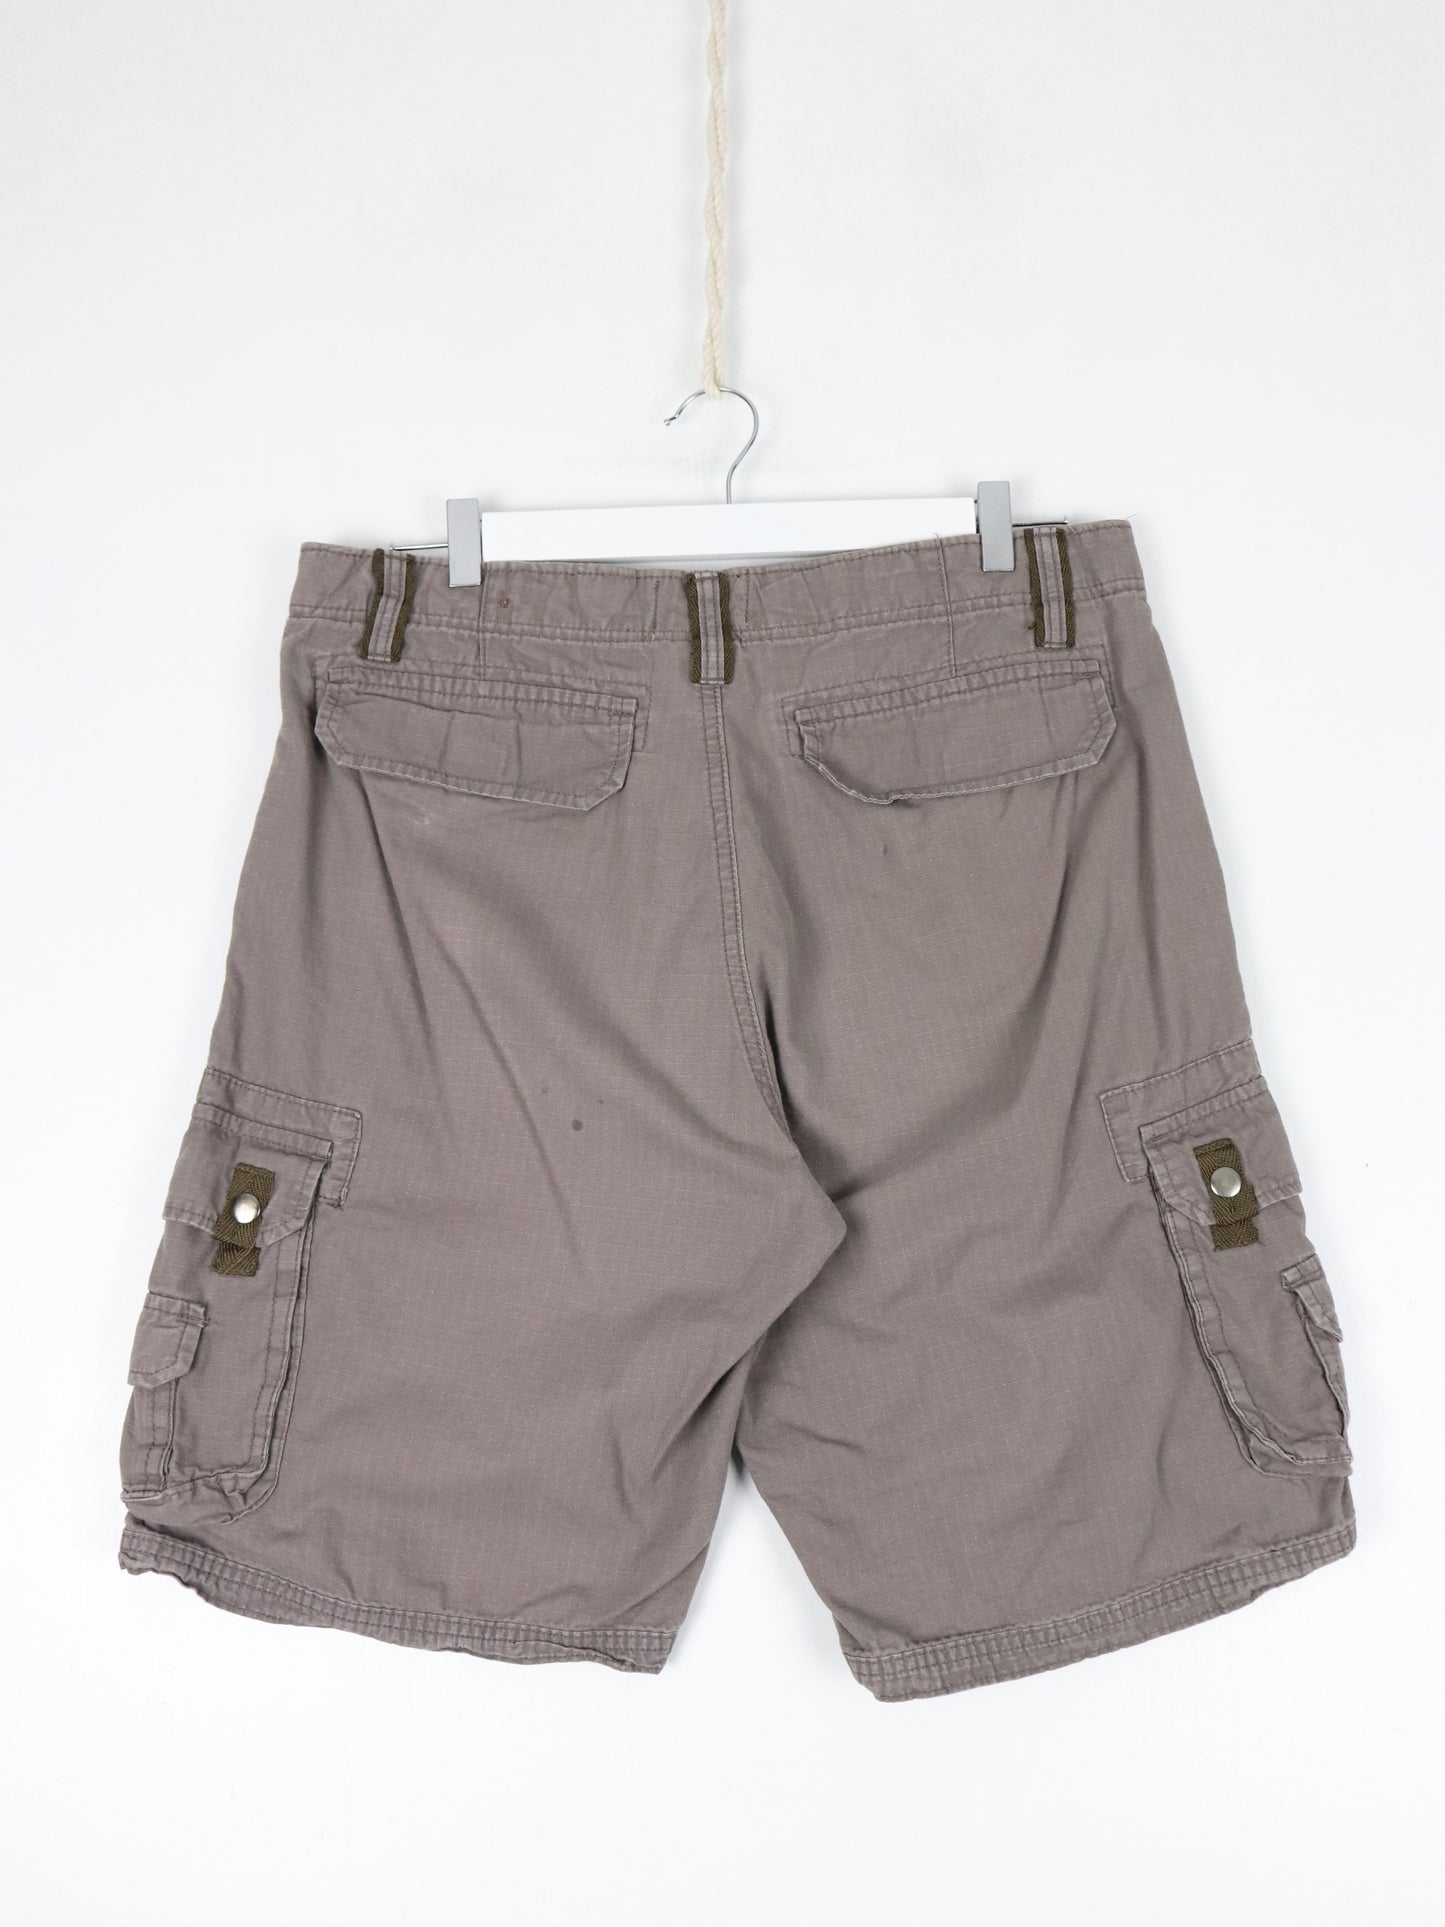 Old Mill Shorts Mens 34 Brown Grey Cargo